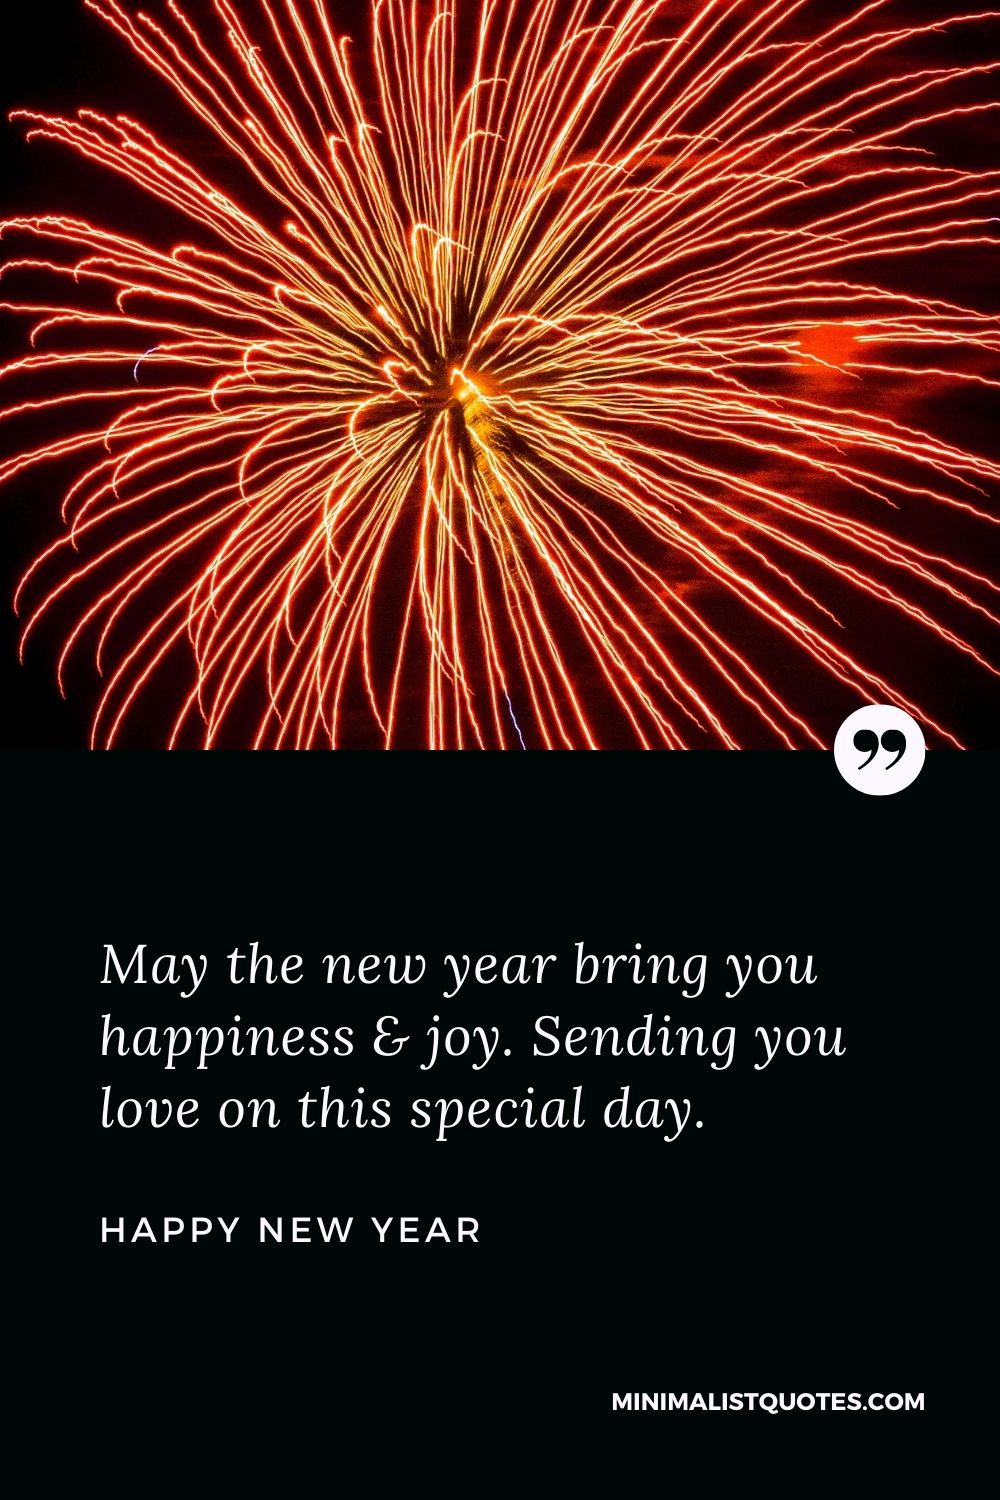 New Year Wish - May the new year bring you happiness & joy. Sending you love on this special day.